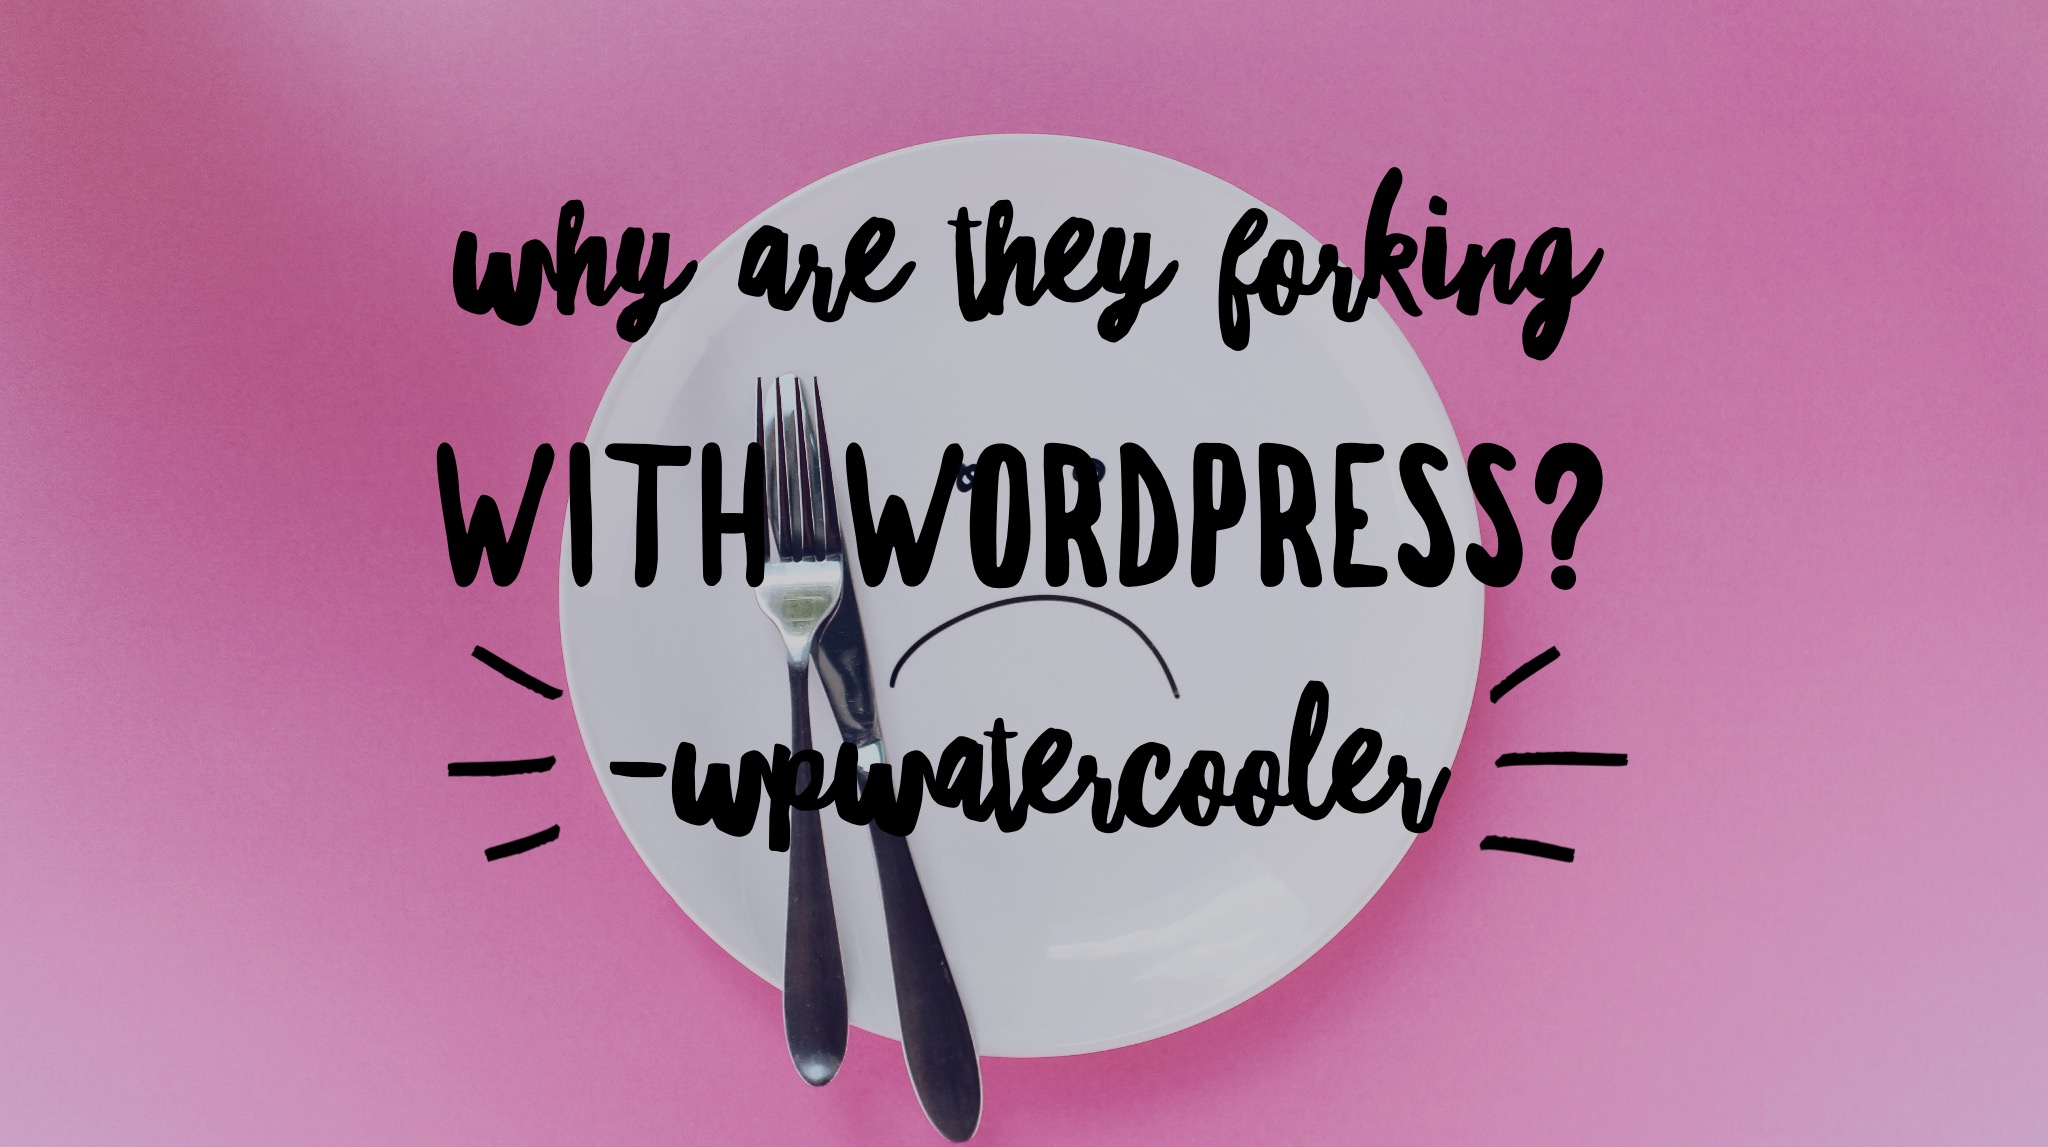 EP288 - Why are they forking with WordPress